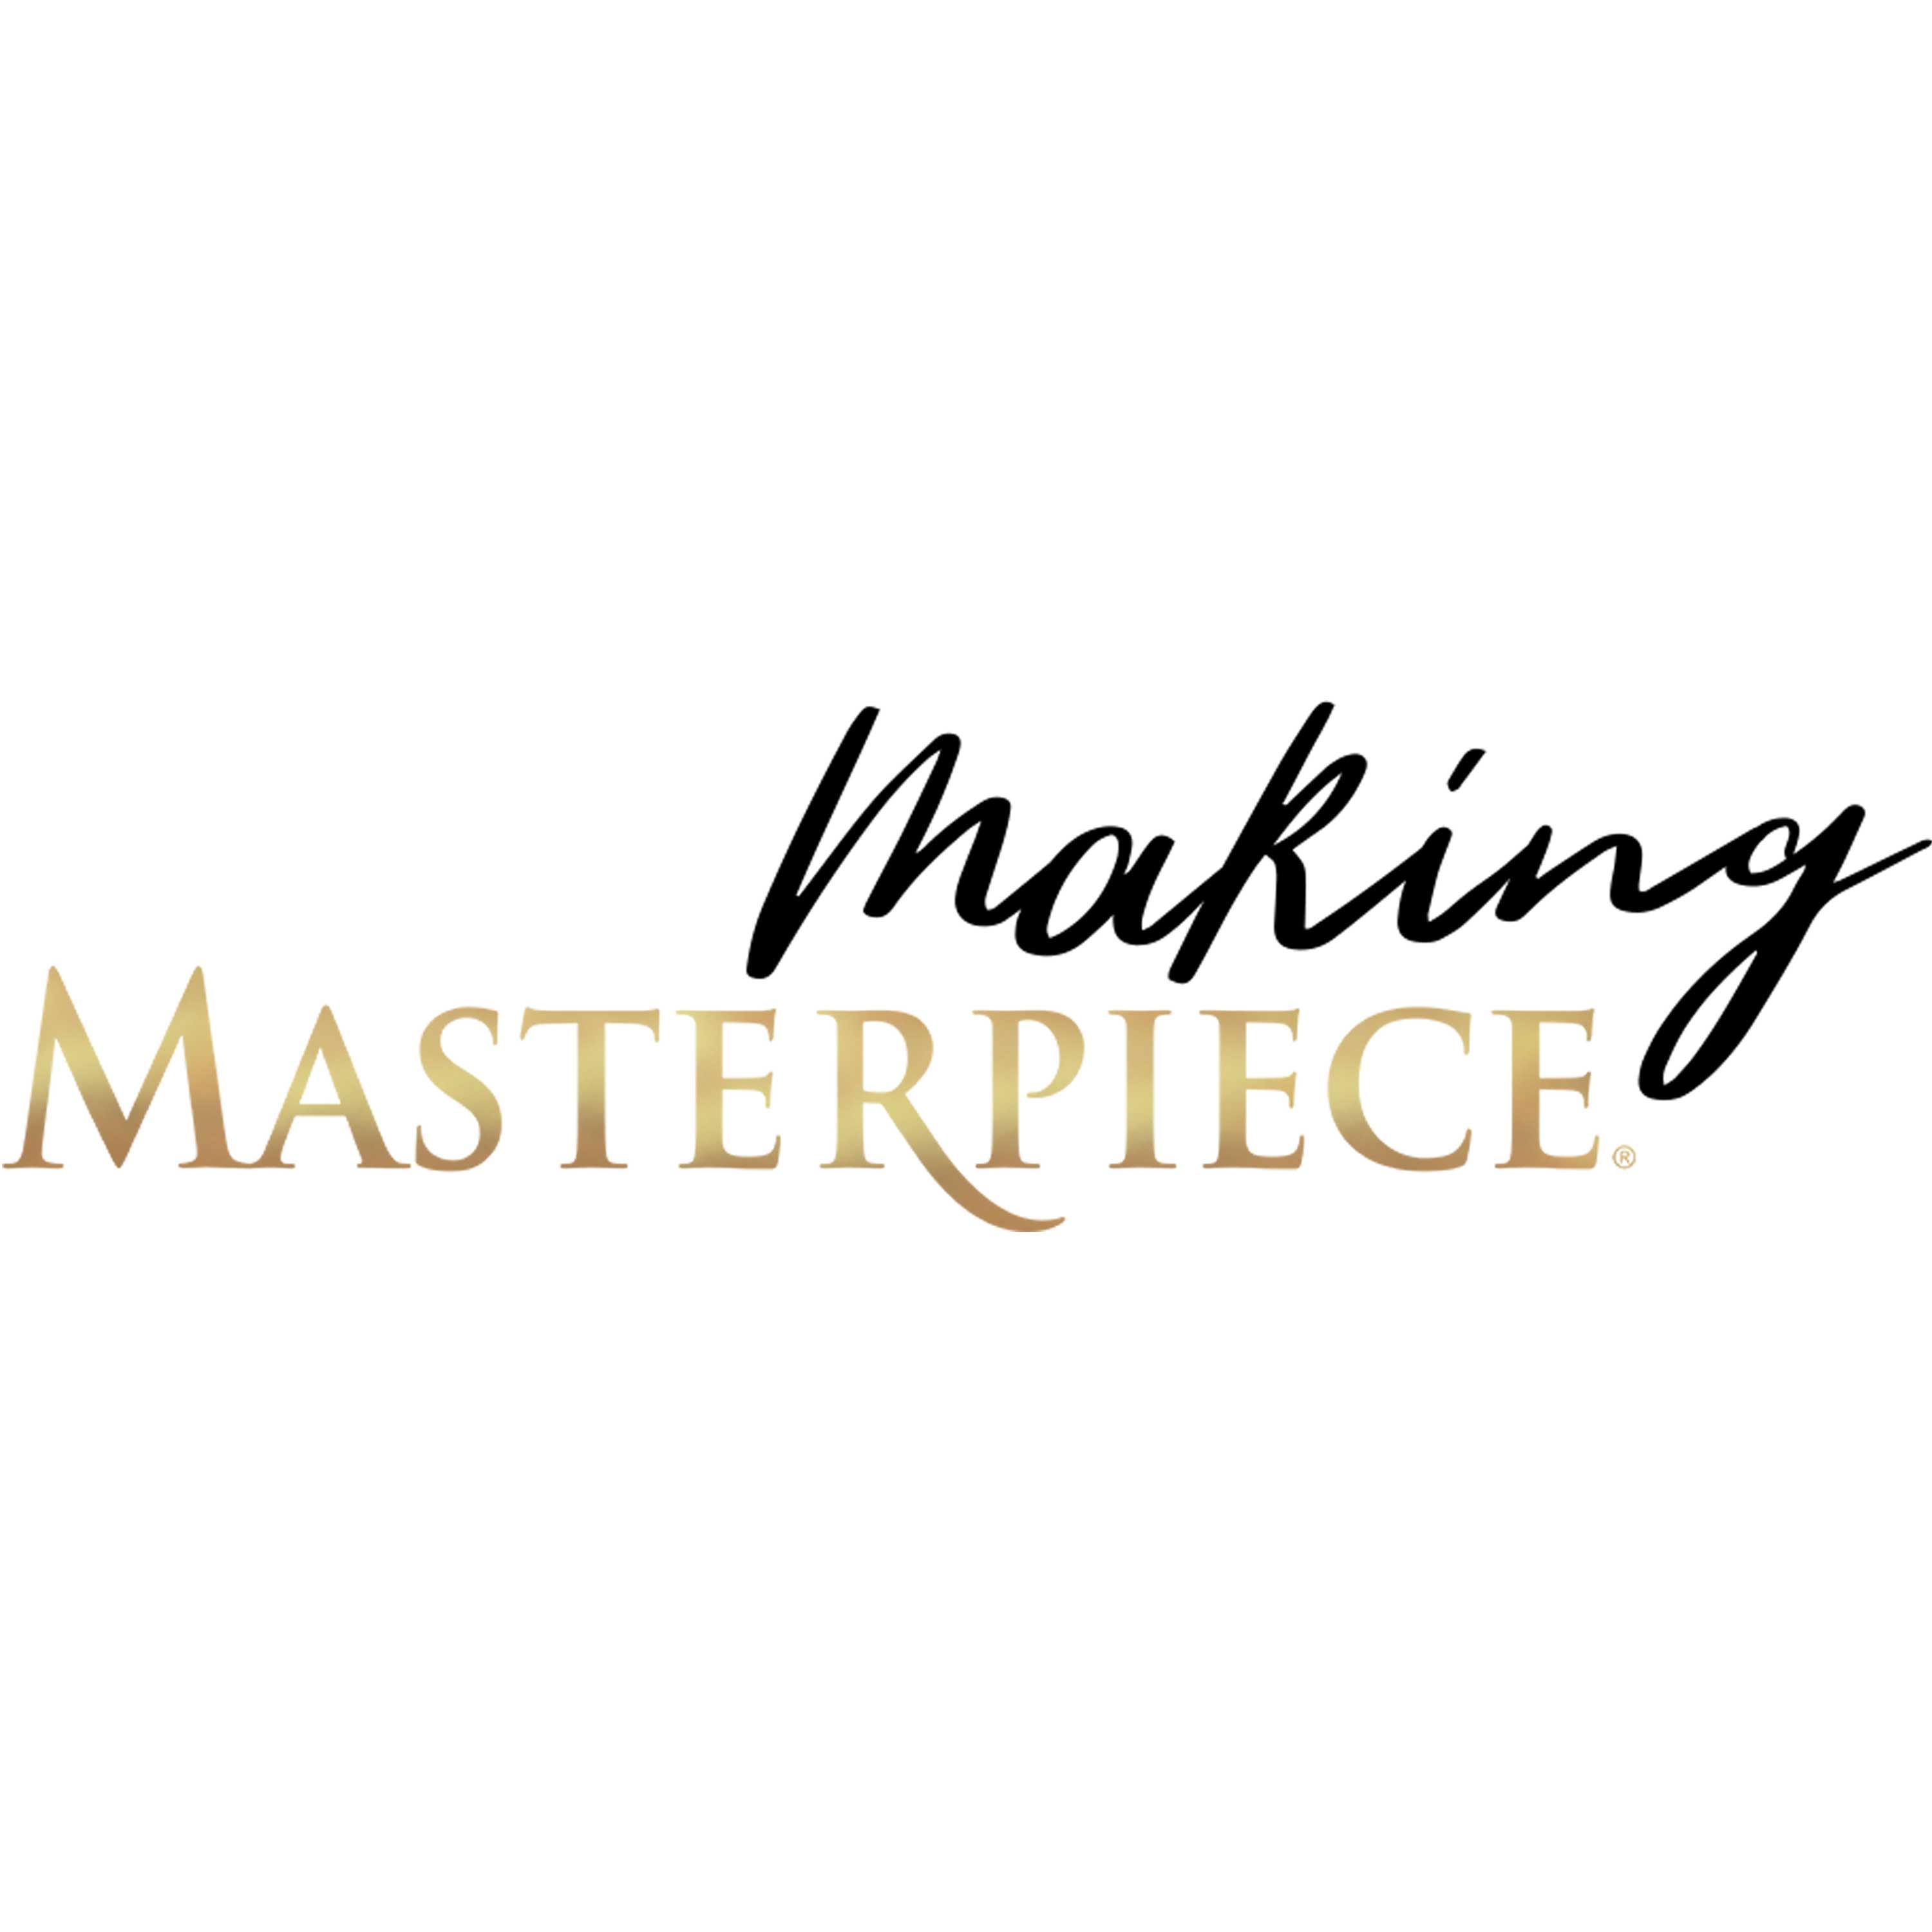 Thumbnail for "Making MASTERPIECE, Episode One: The Beginning ".